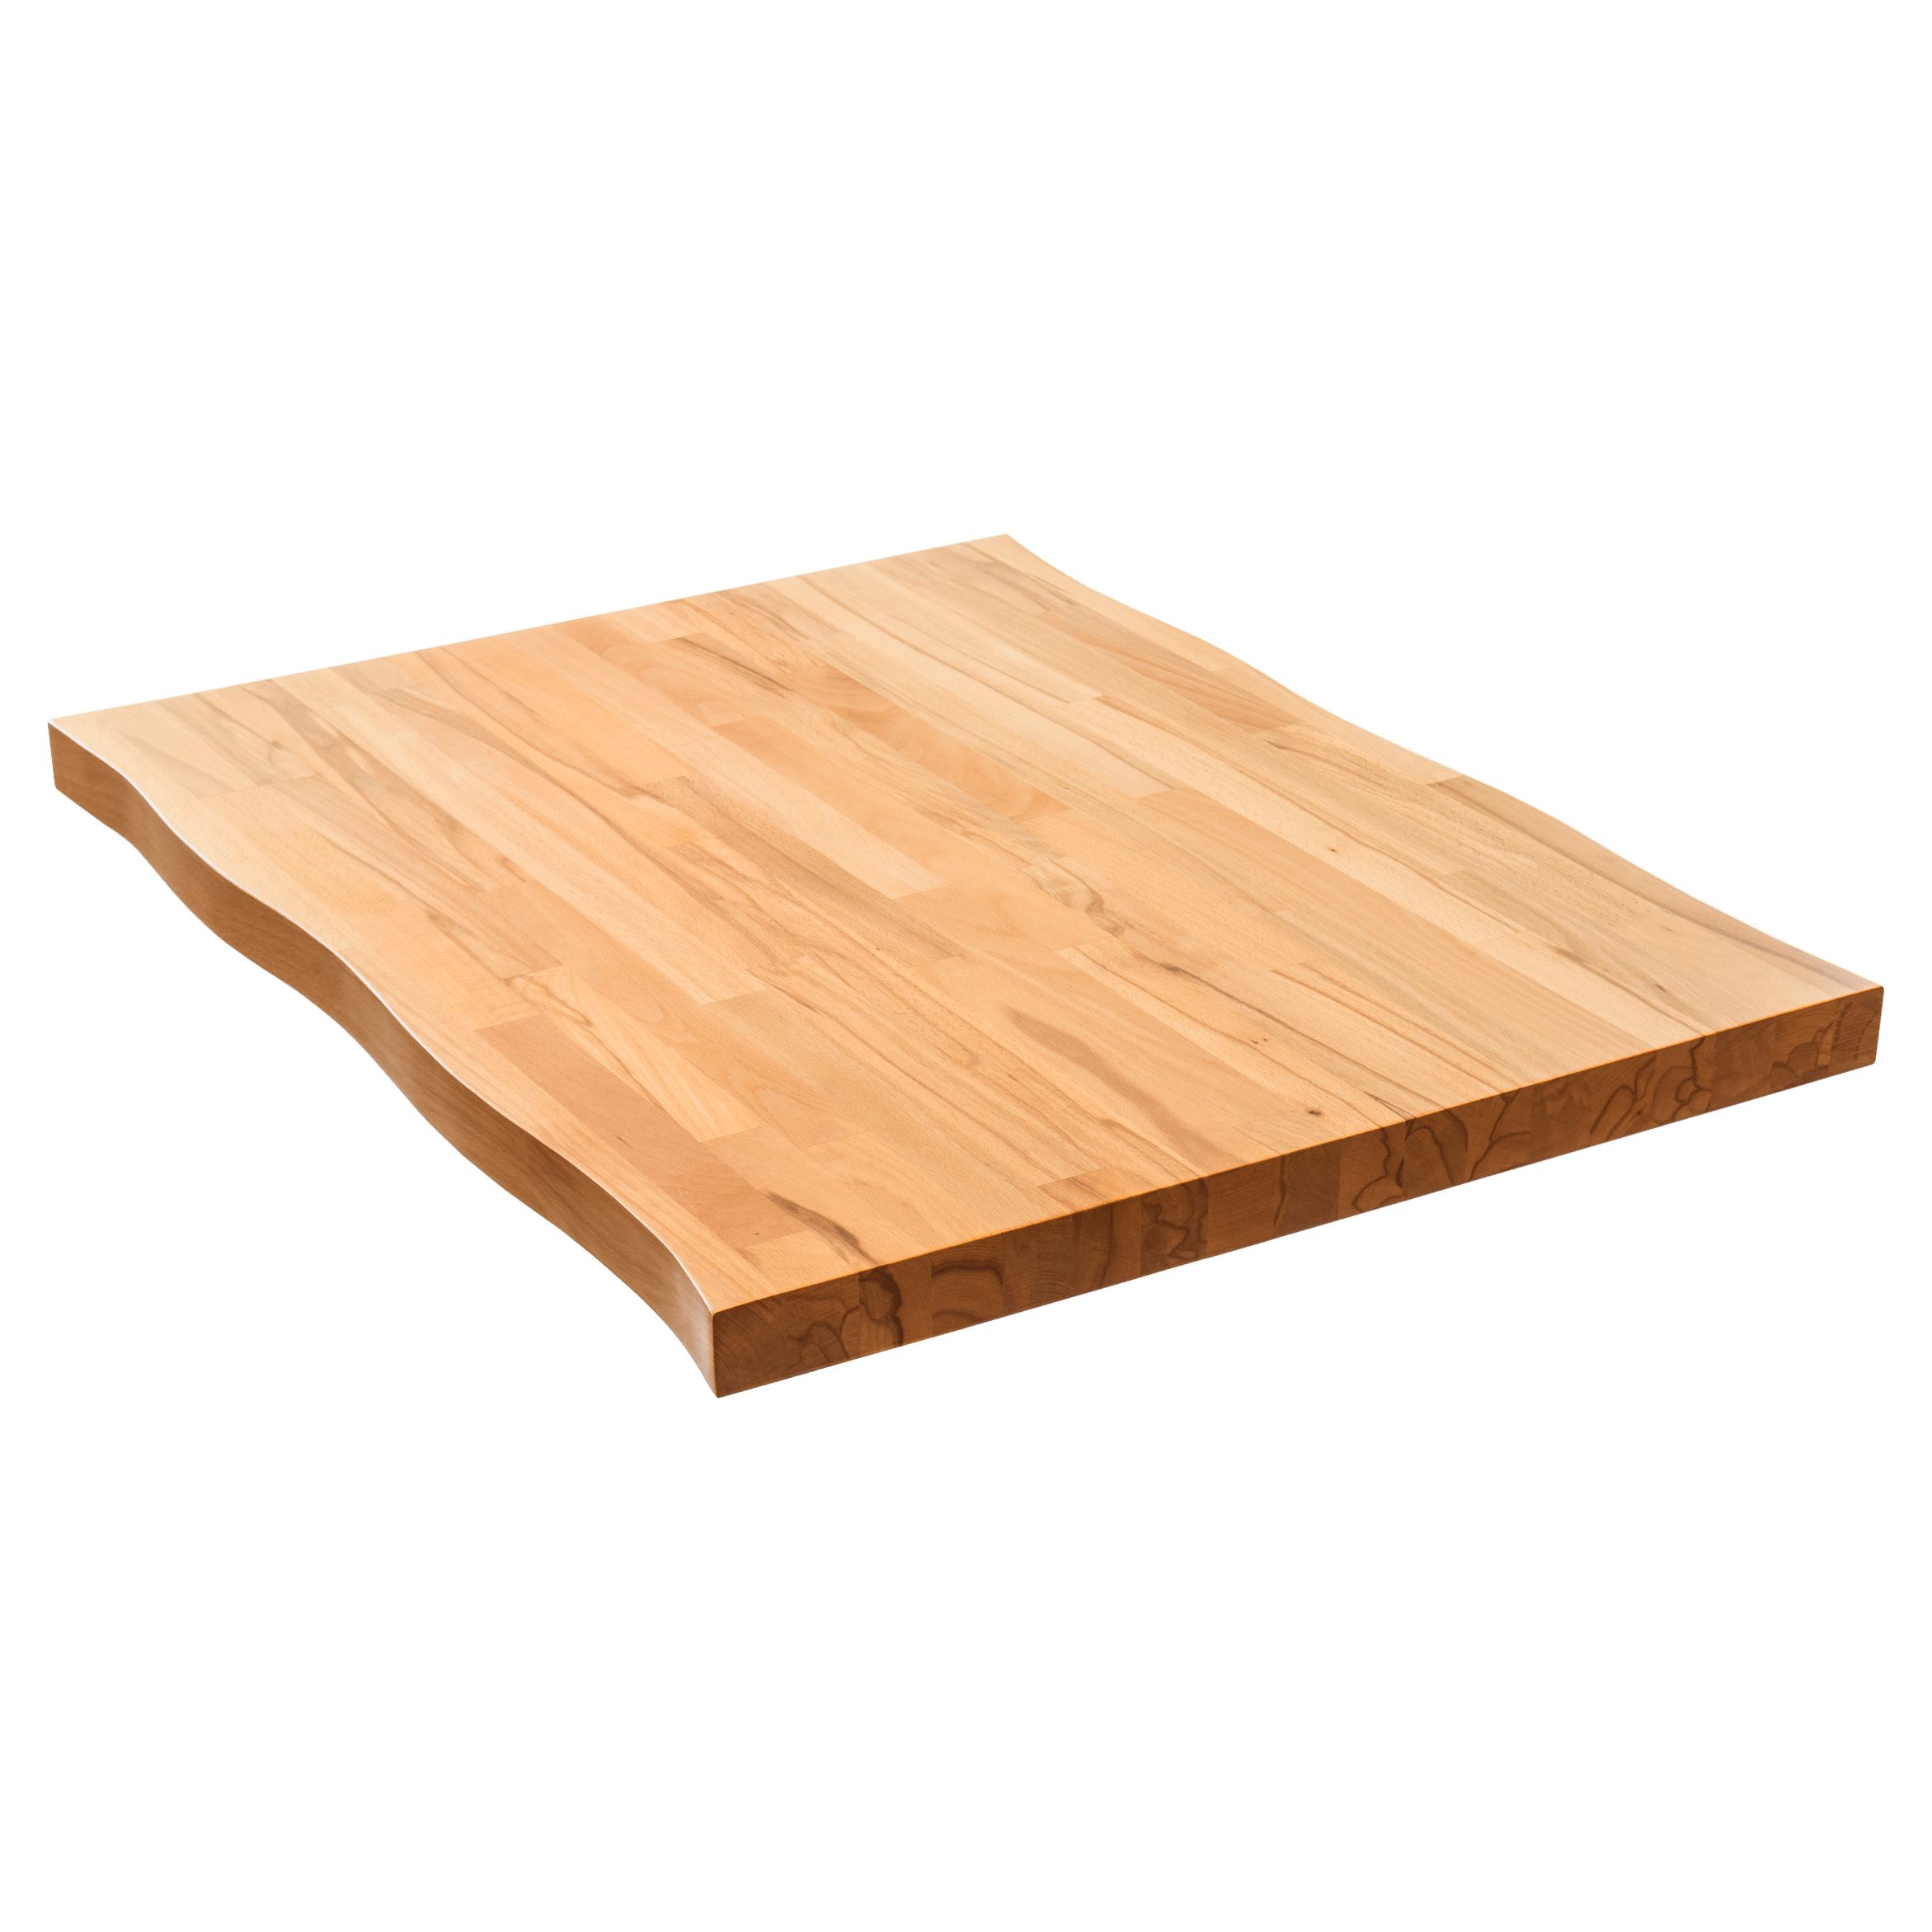 Reclaimed Wood Table Tops - Restaurant & Cafe Supplies Online